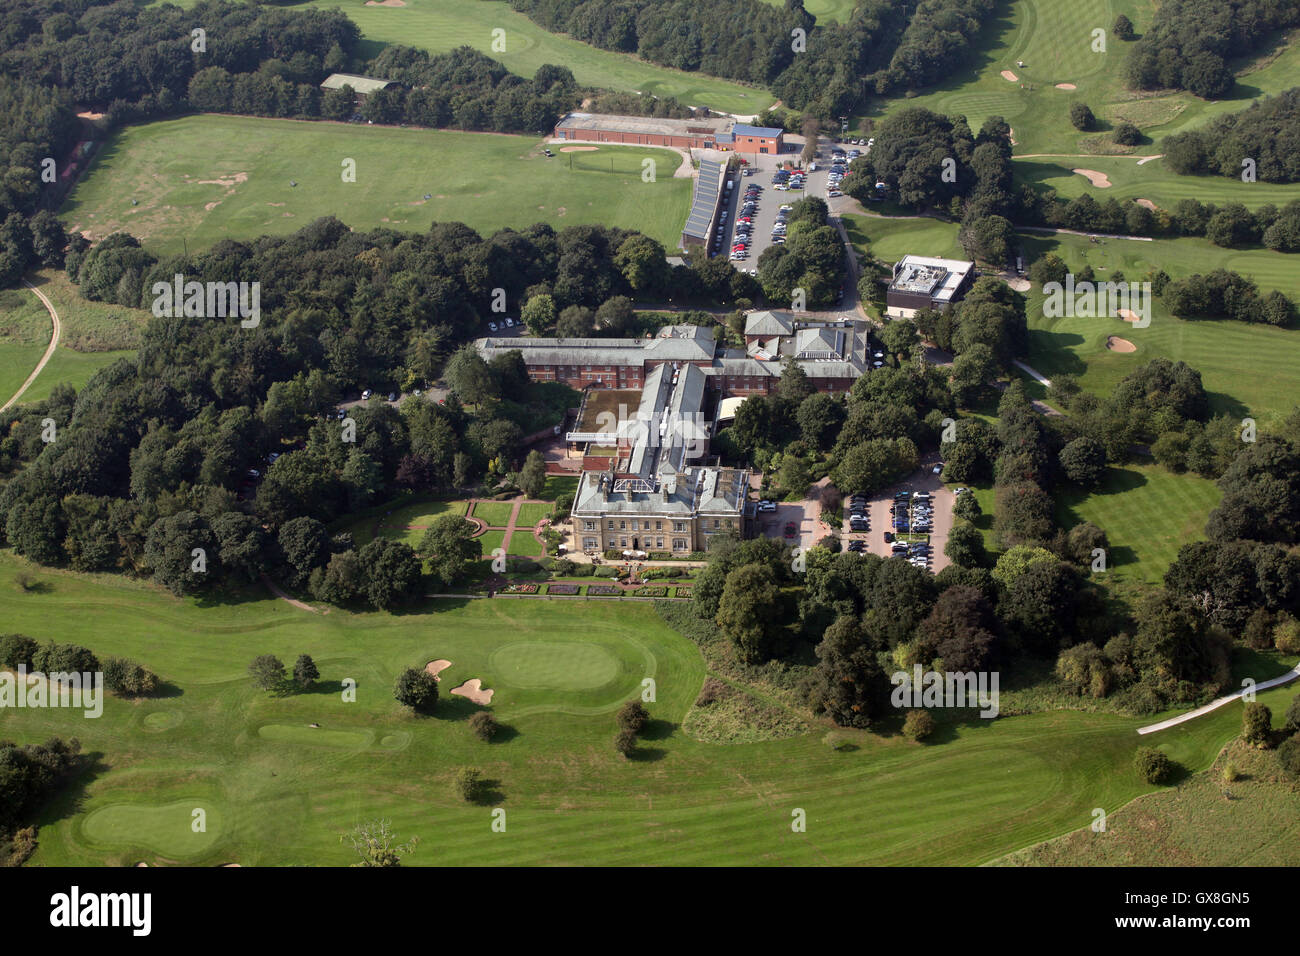 aerial view of Oulton Hall de Vere Hotel and Golf Course, Leeds 26, West Yorkshire, UK Stock Photo